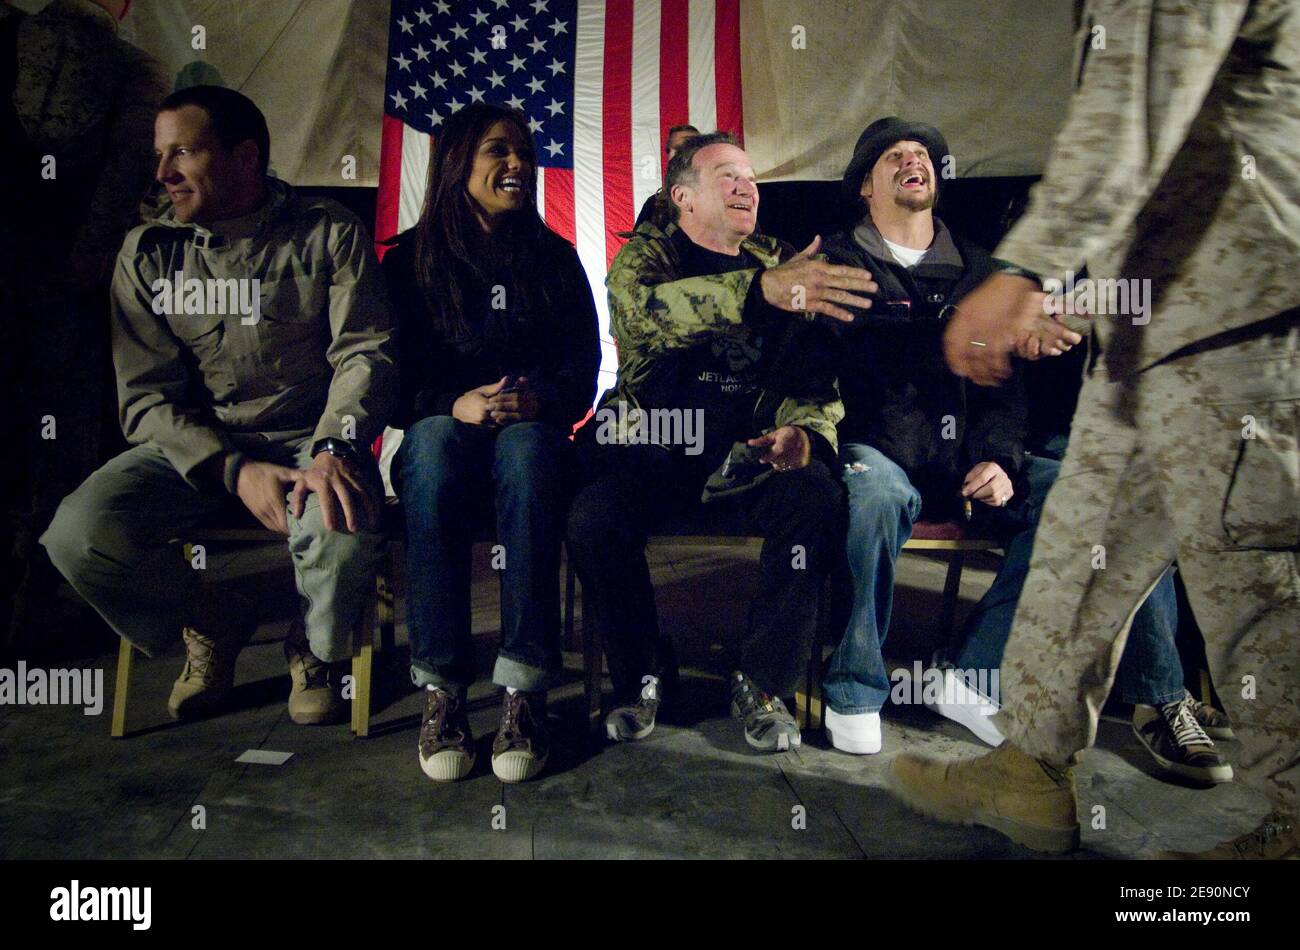 Seven-time Tour de France champion Lance Armstrong, Miss USA Rachel Smith, comedian Robin Williams and musician Kid Rock greet U.S. Marines after a performance at Al Taqqadum, Iraq, on December 18, 2007. Photo by DOD via ABACAPRESS.COM Stock Photo